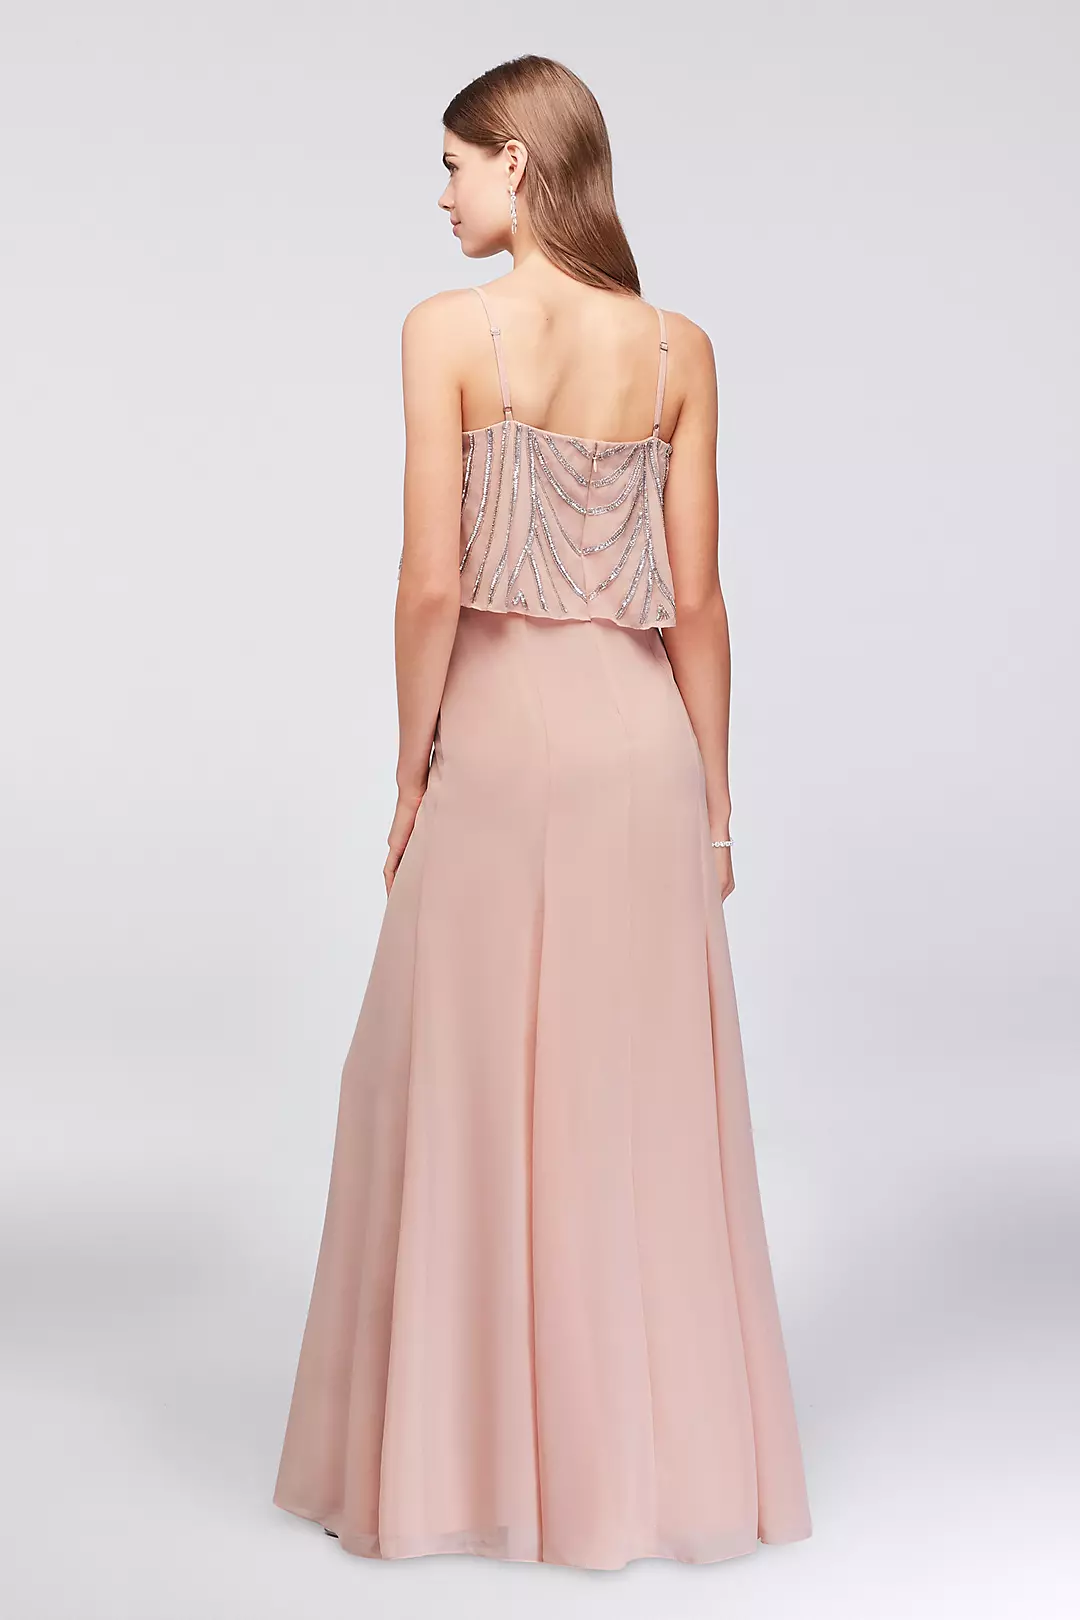 Chiffon Gown With Drapey Sequined Bodice Image 2